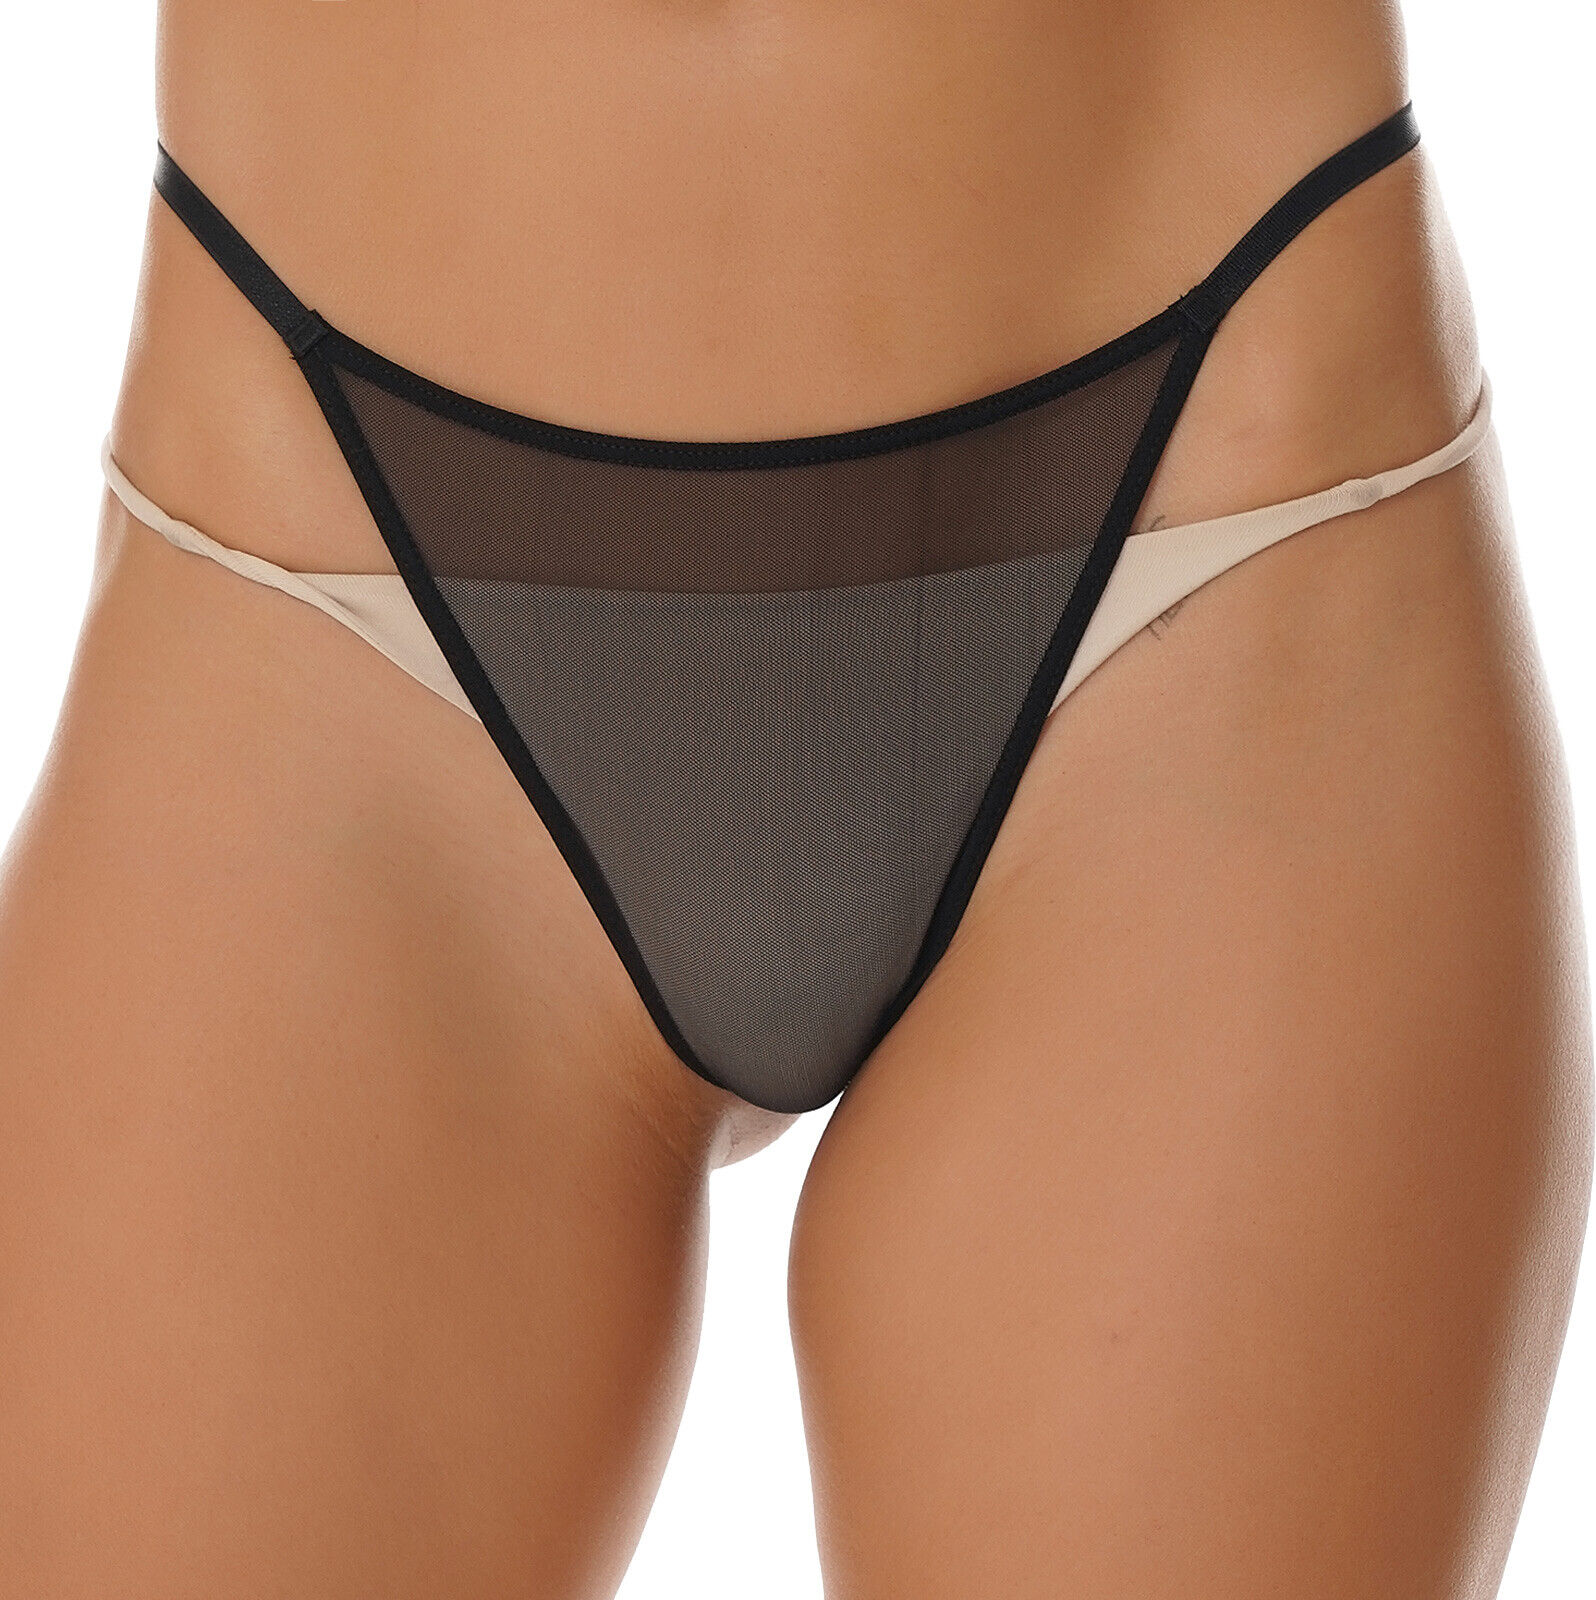 Lace See-through Triangle G-String Panty